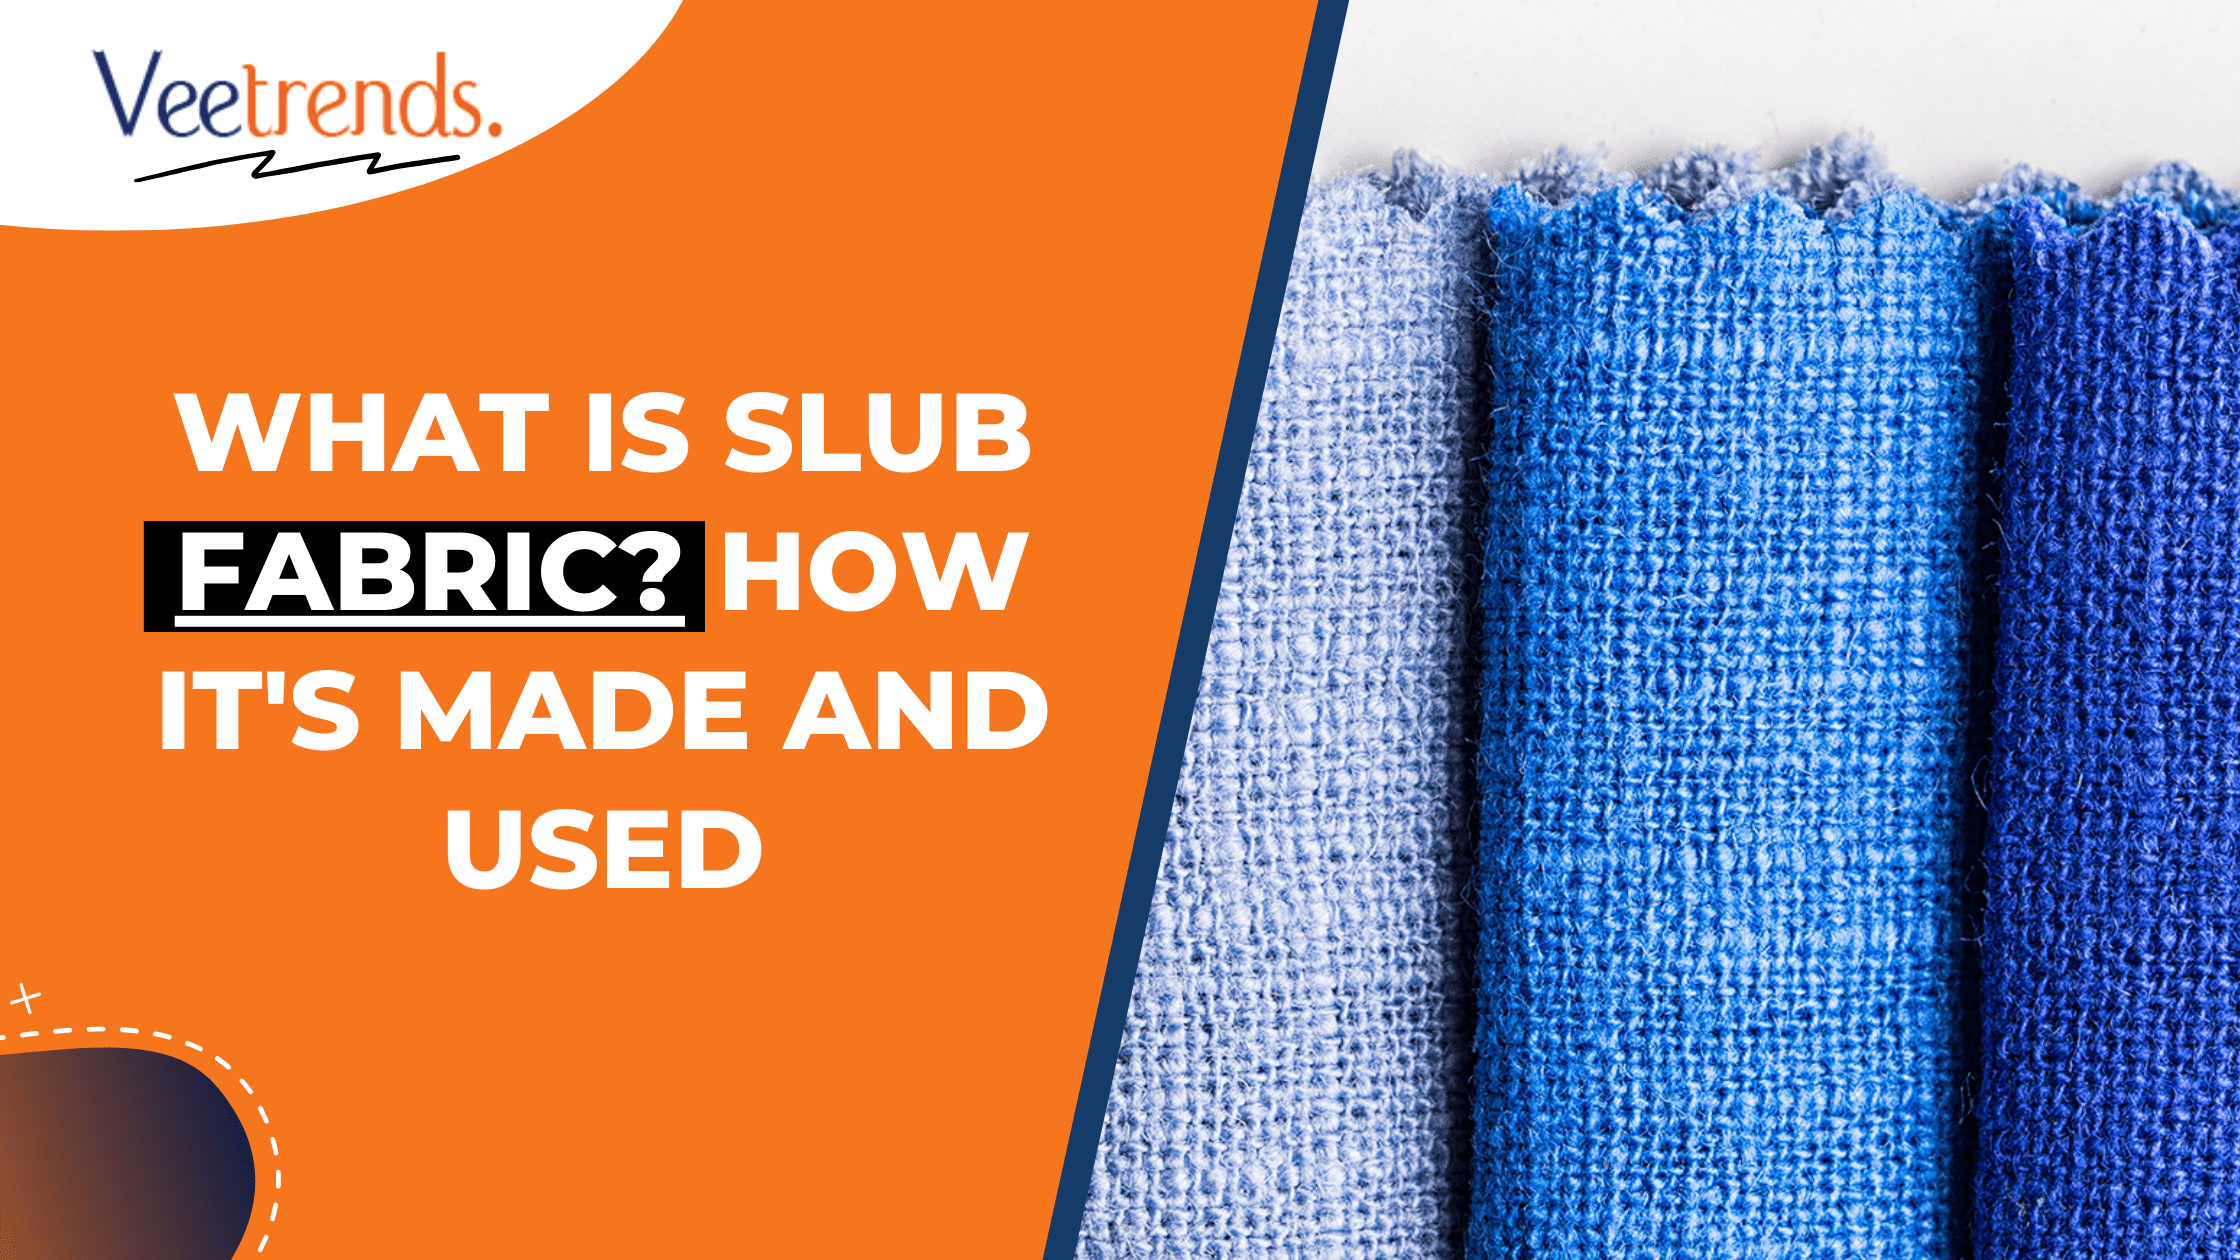 What Is Slub Fabric? How it's Made and Used